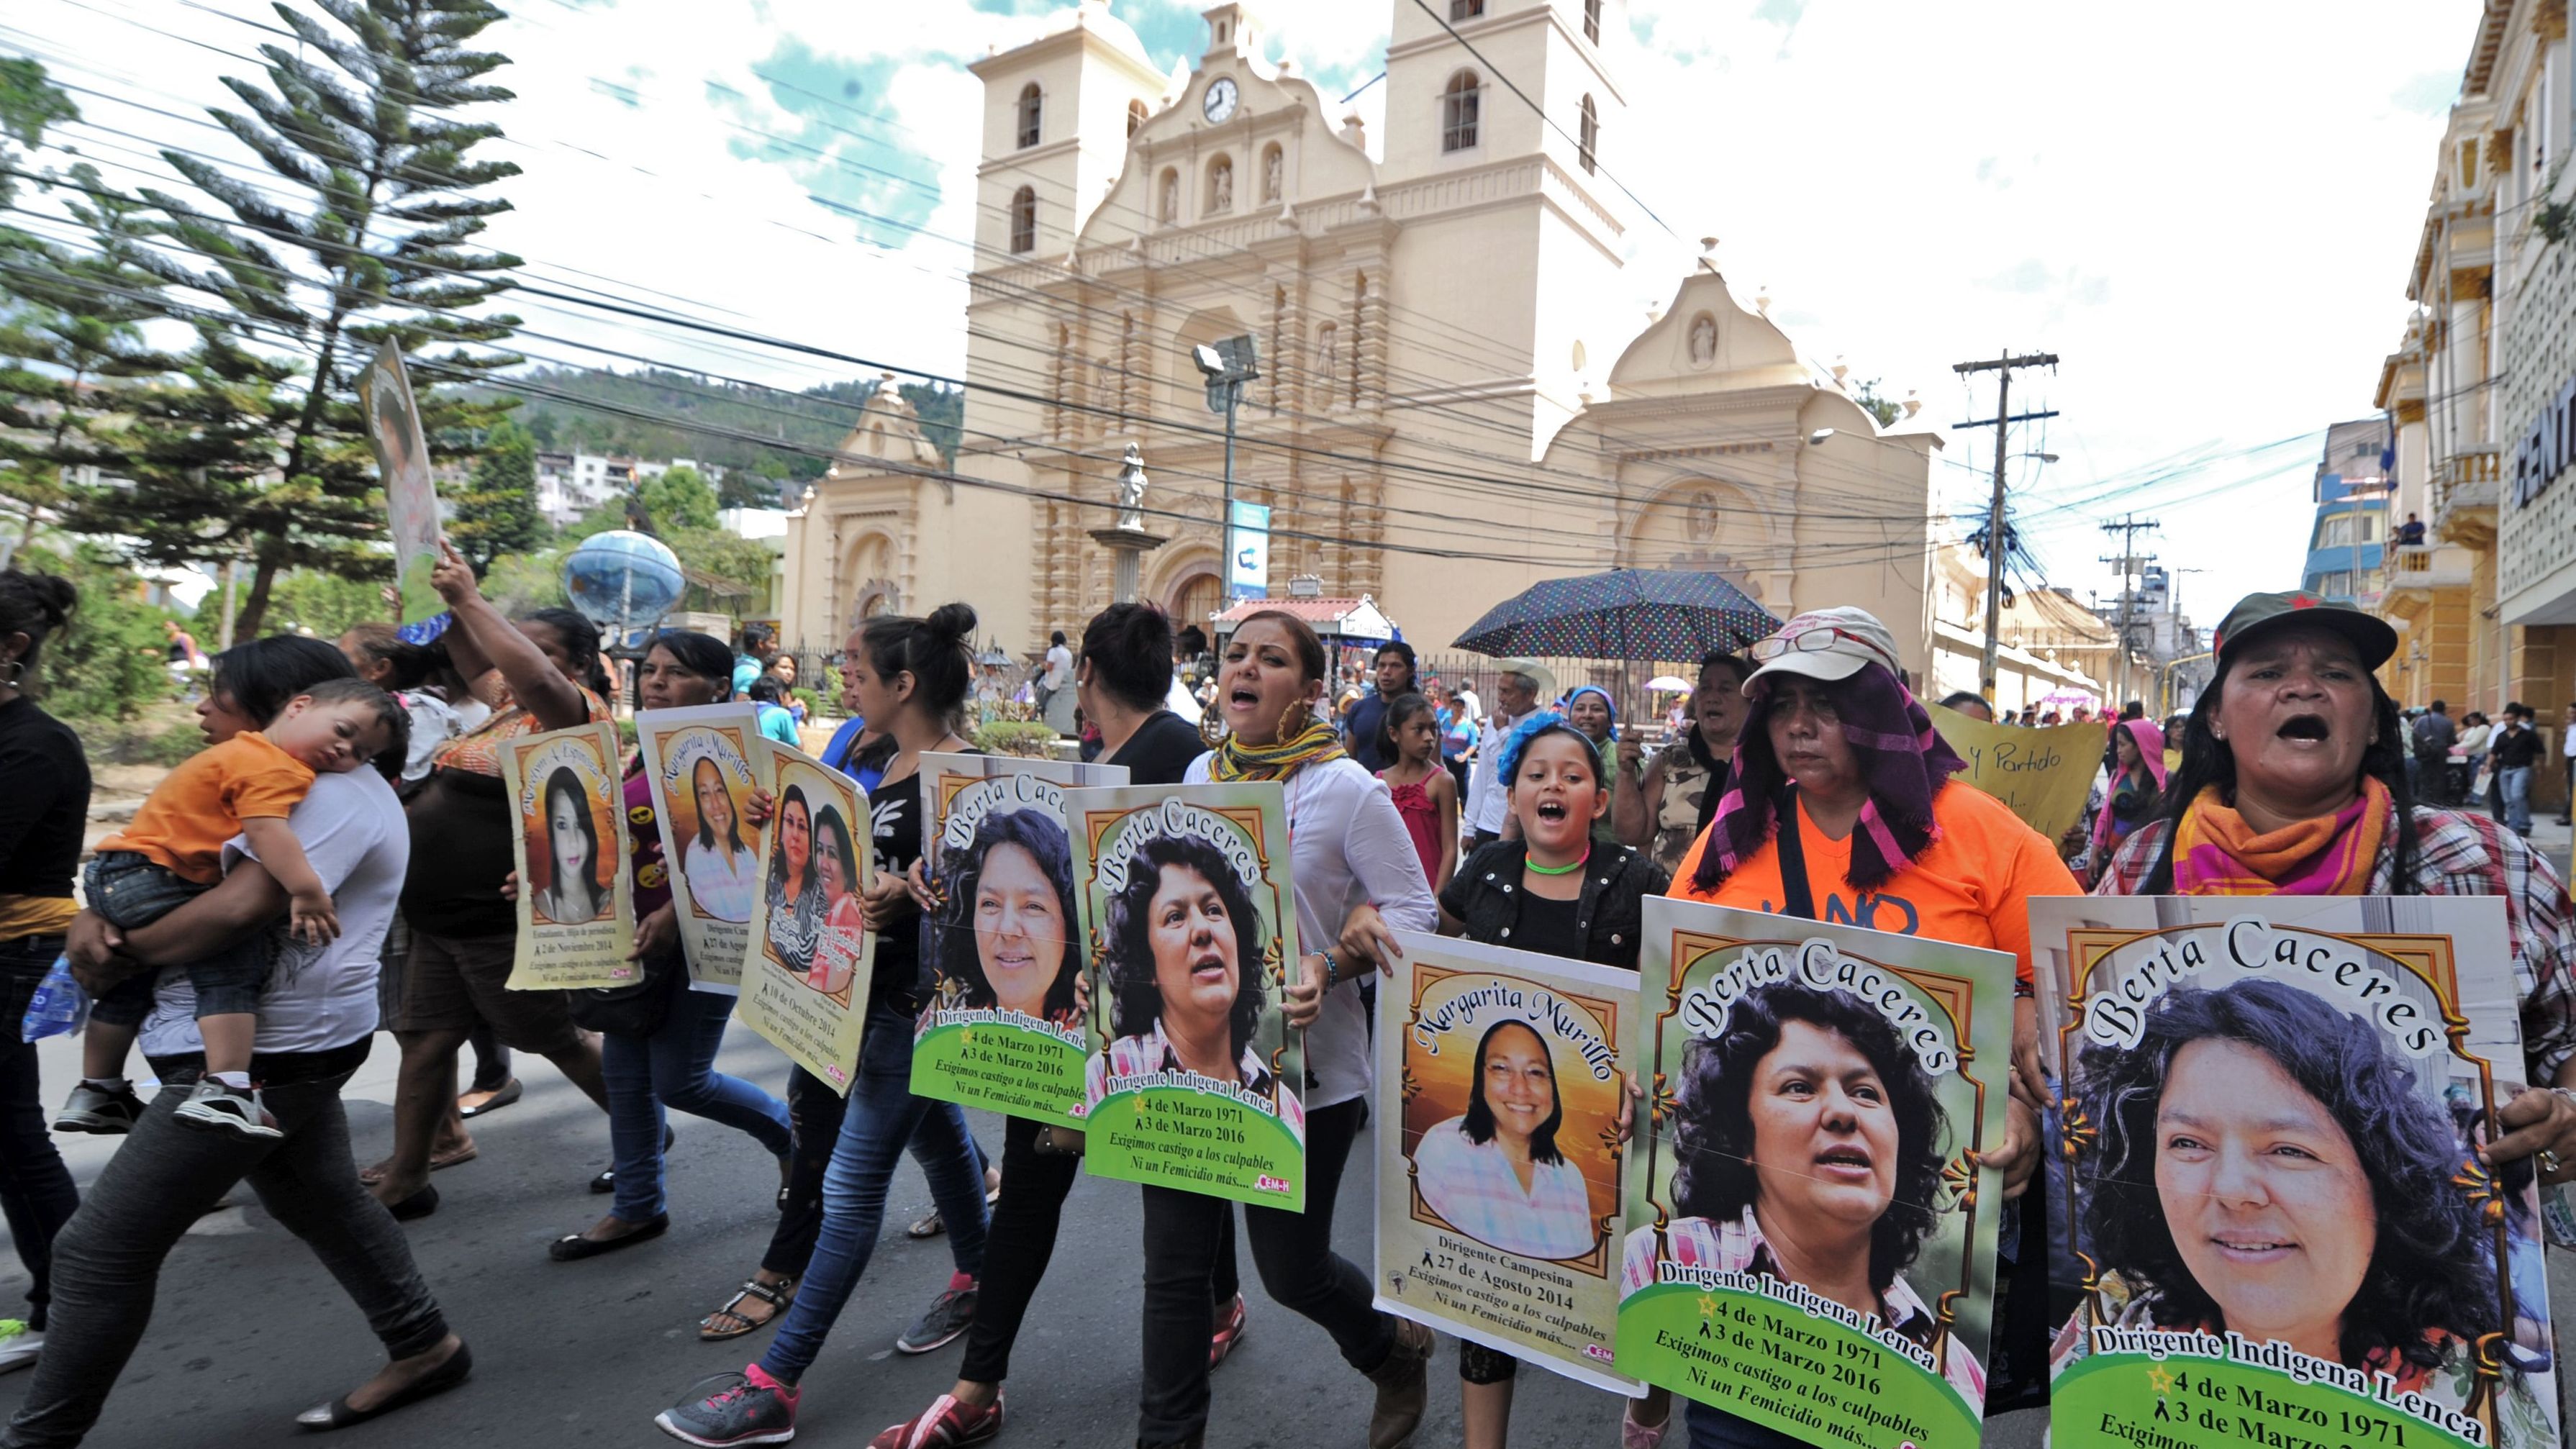 Protesters hold pictures of Berta Caceres at an International Women's day demonstration in Tegucigalpa on March 8.